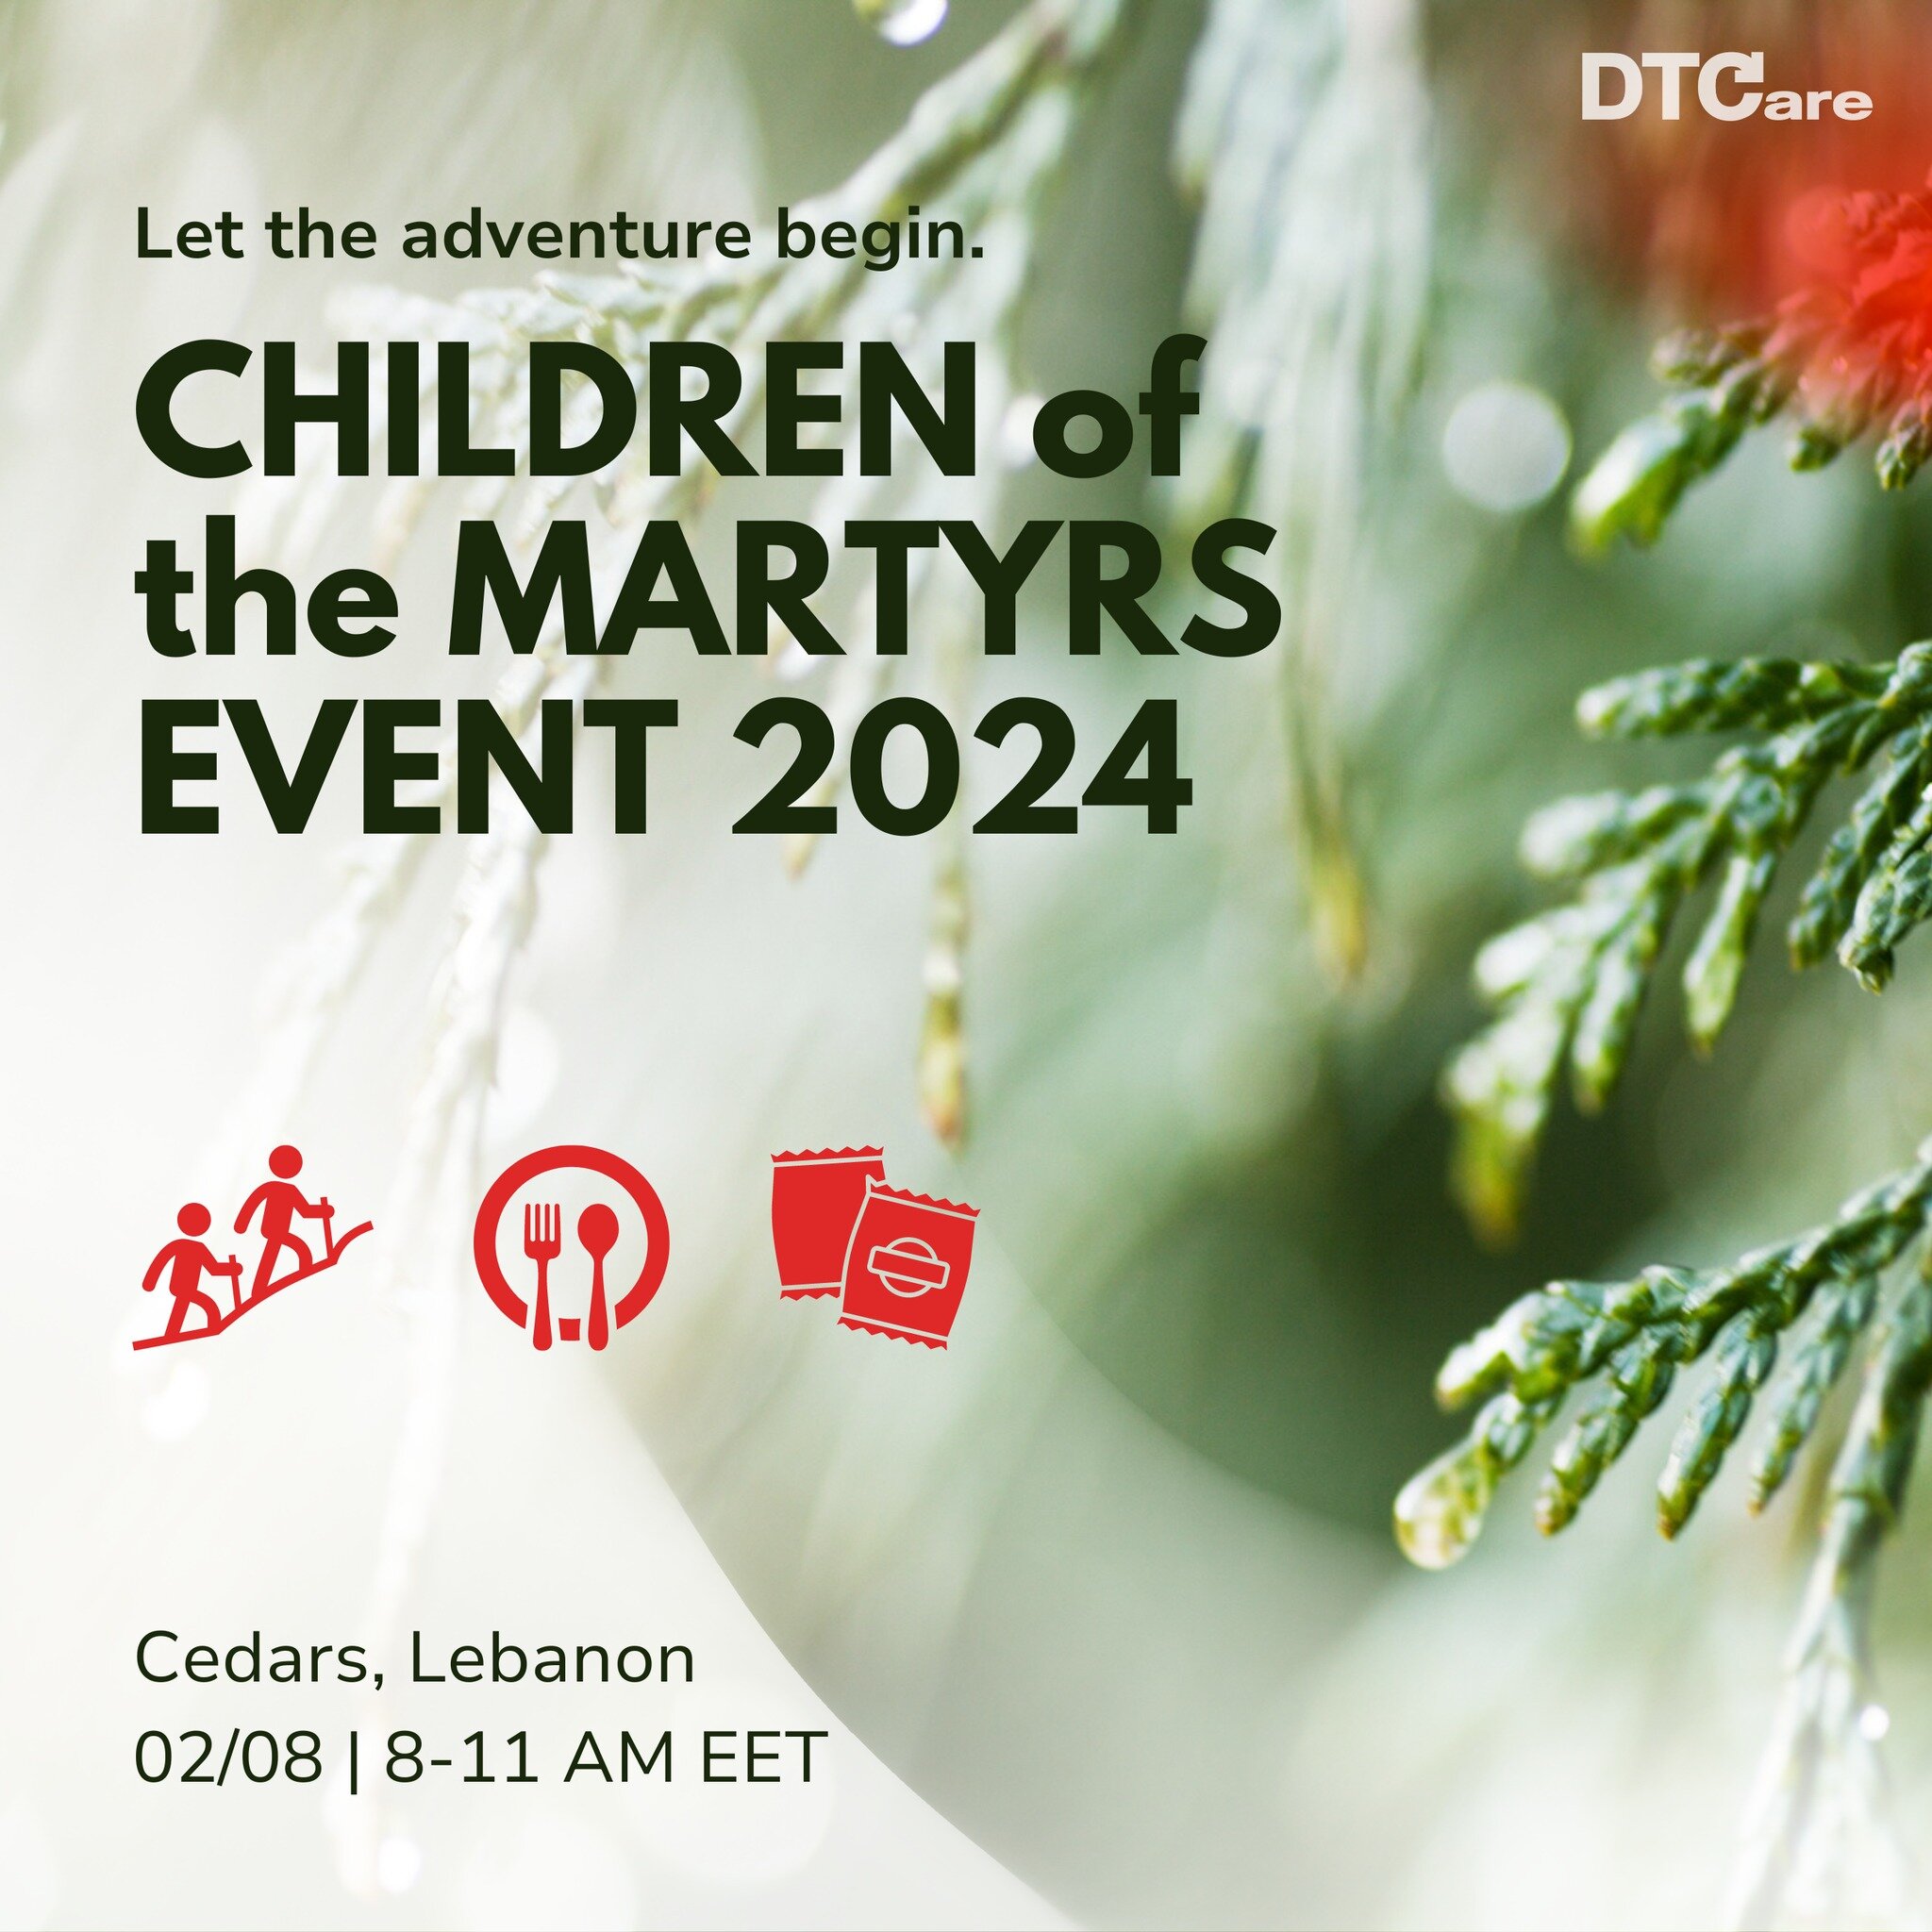 DTCare is hosting our Second Children of Martyrs Event with 60 young people on 8 February 2024 at Cedars from 8-11 AM EET to pay homage to the brave men and women who made the ultimate sacrifice for Lebanon. 🌲🇱🇧 Stay tuned for more!

#TheDTCareDif